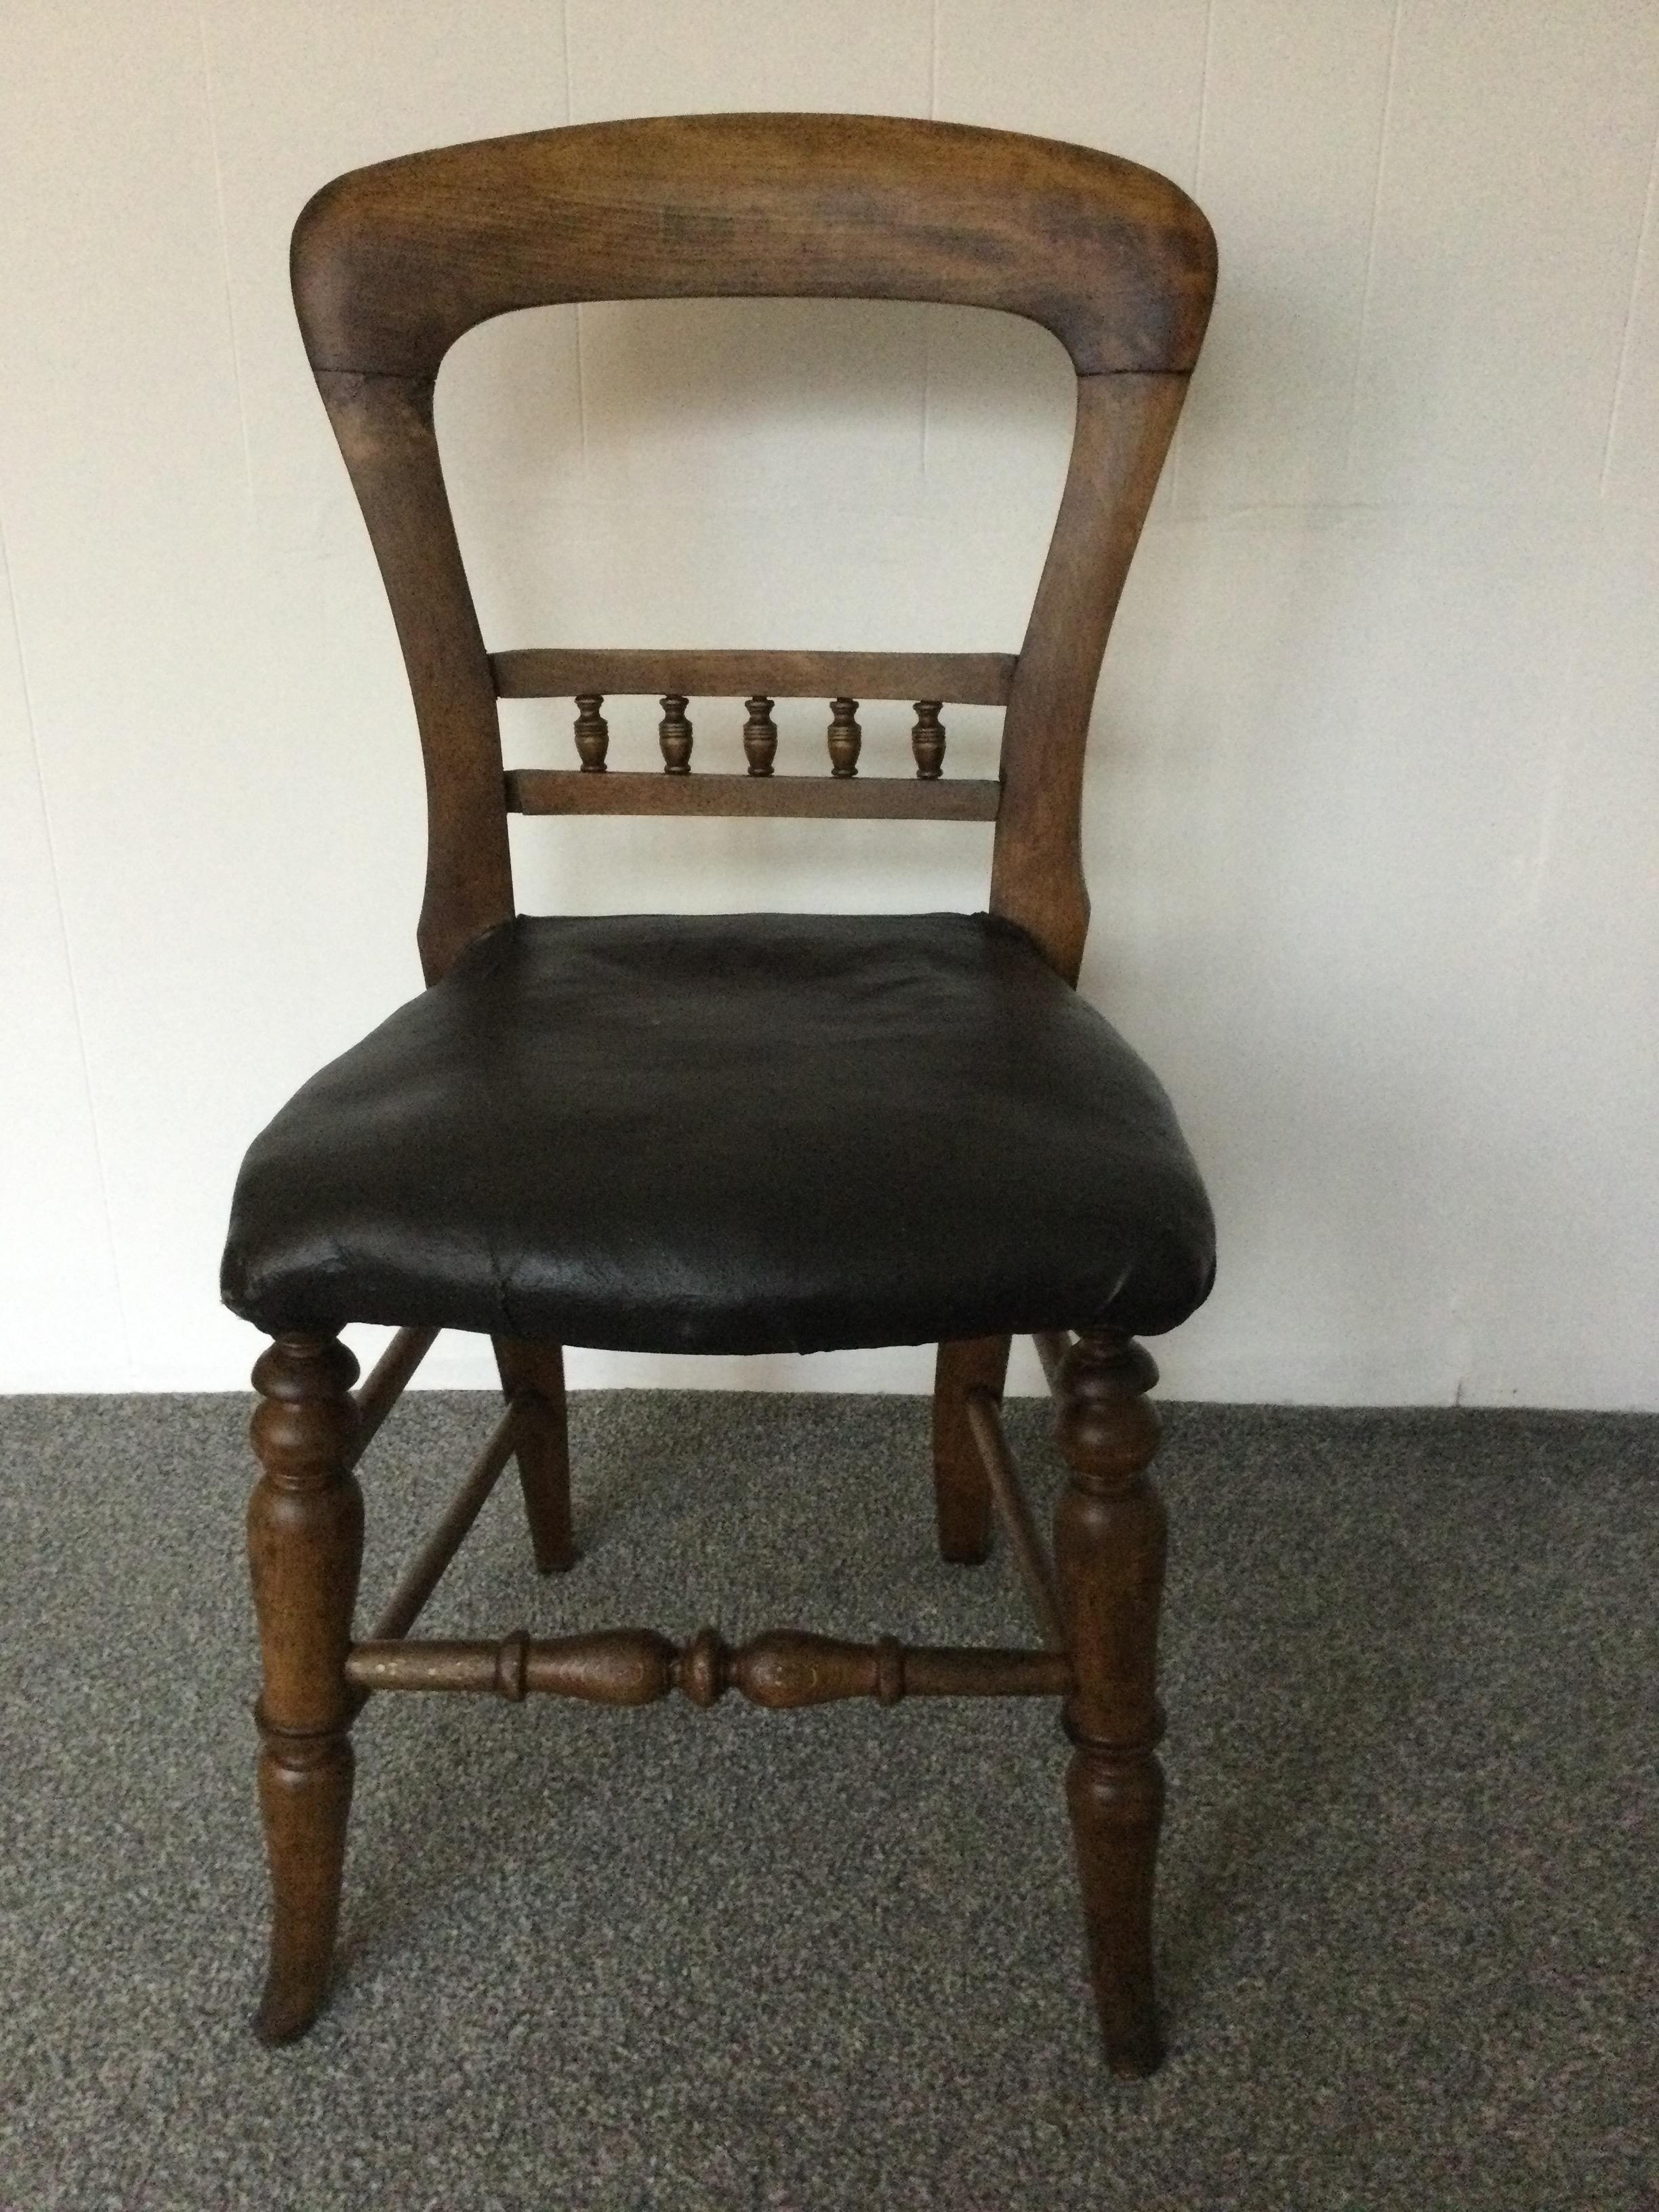 Antique Boloon Back chair